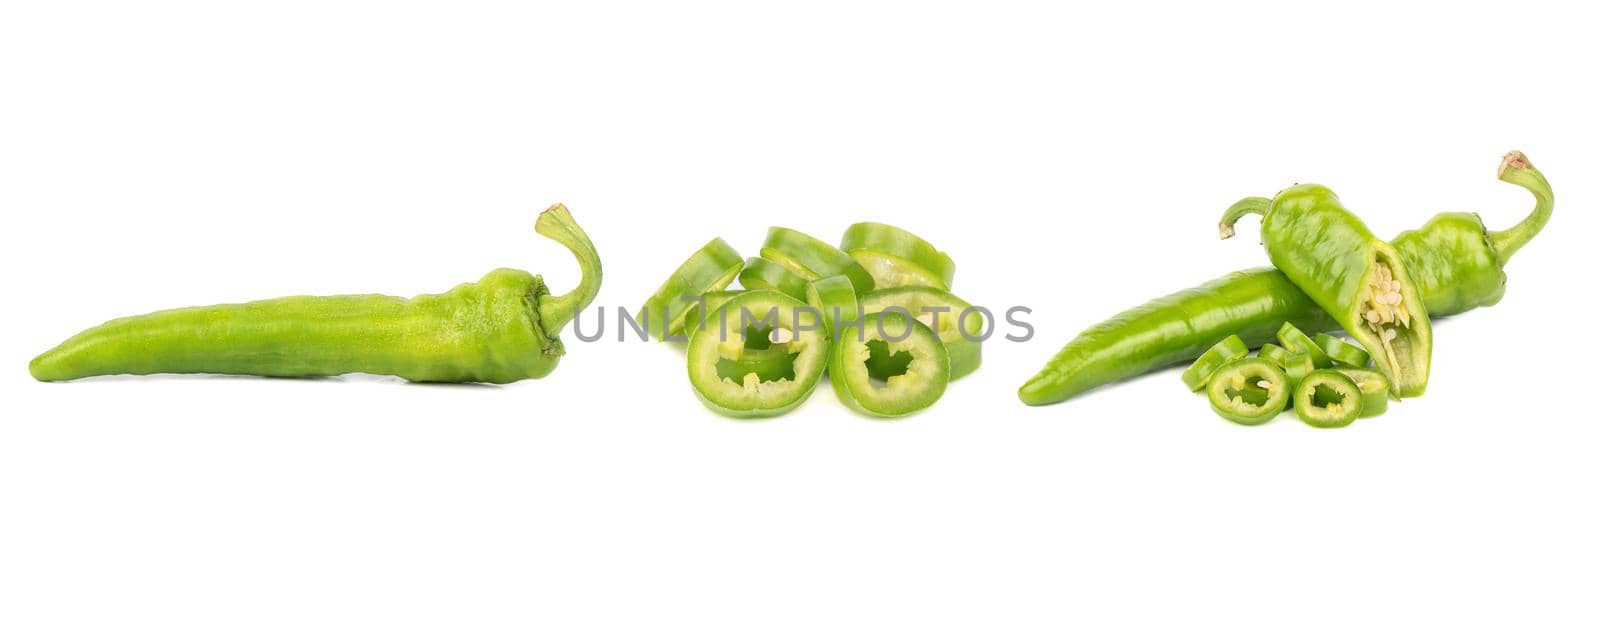 Green jalapeno peppers collection isolate on white background